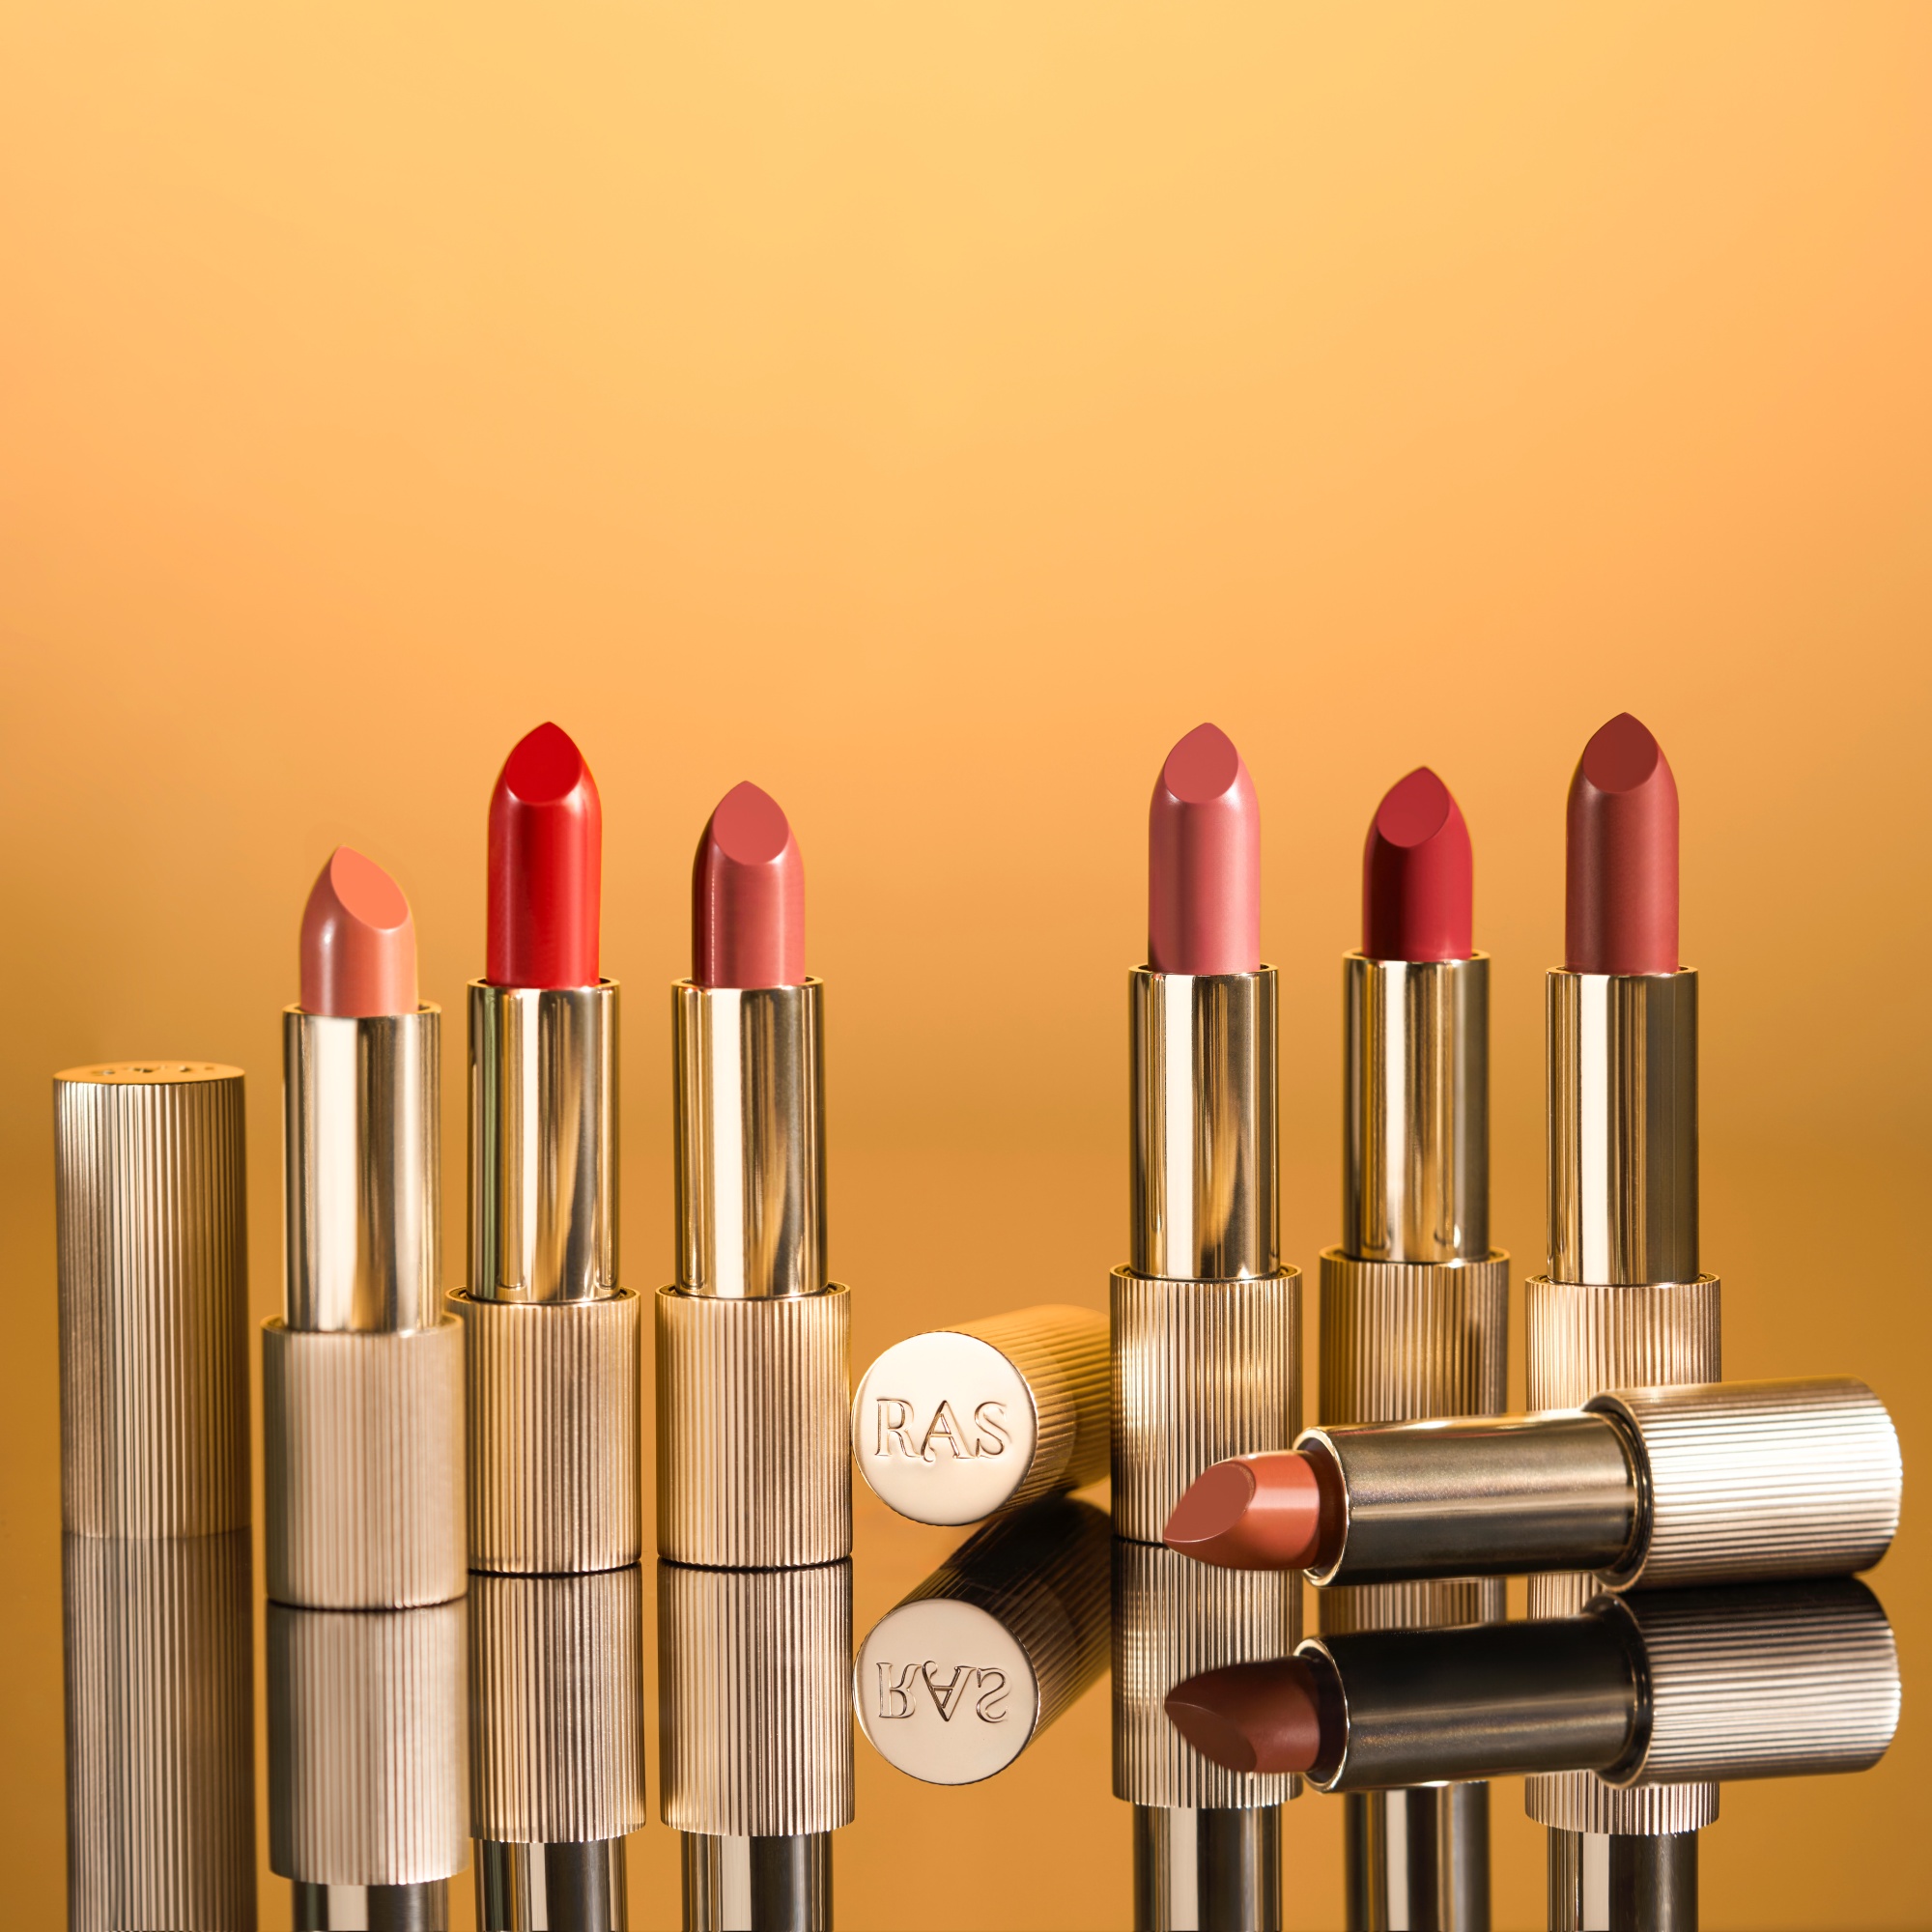 RAS' Lumiere Satin Matte Lipsticks - 7 luxurious shades for you to choose your shade of confidence!